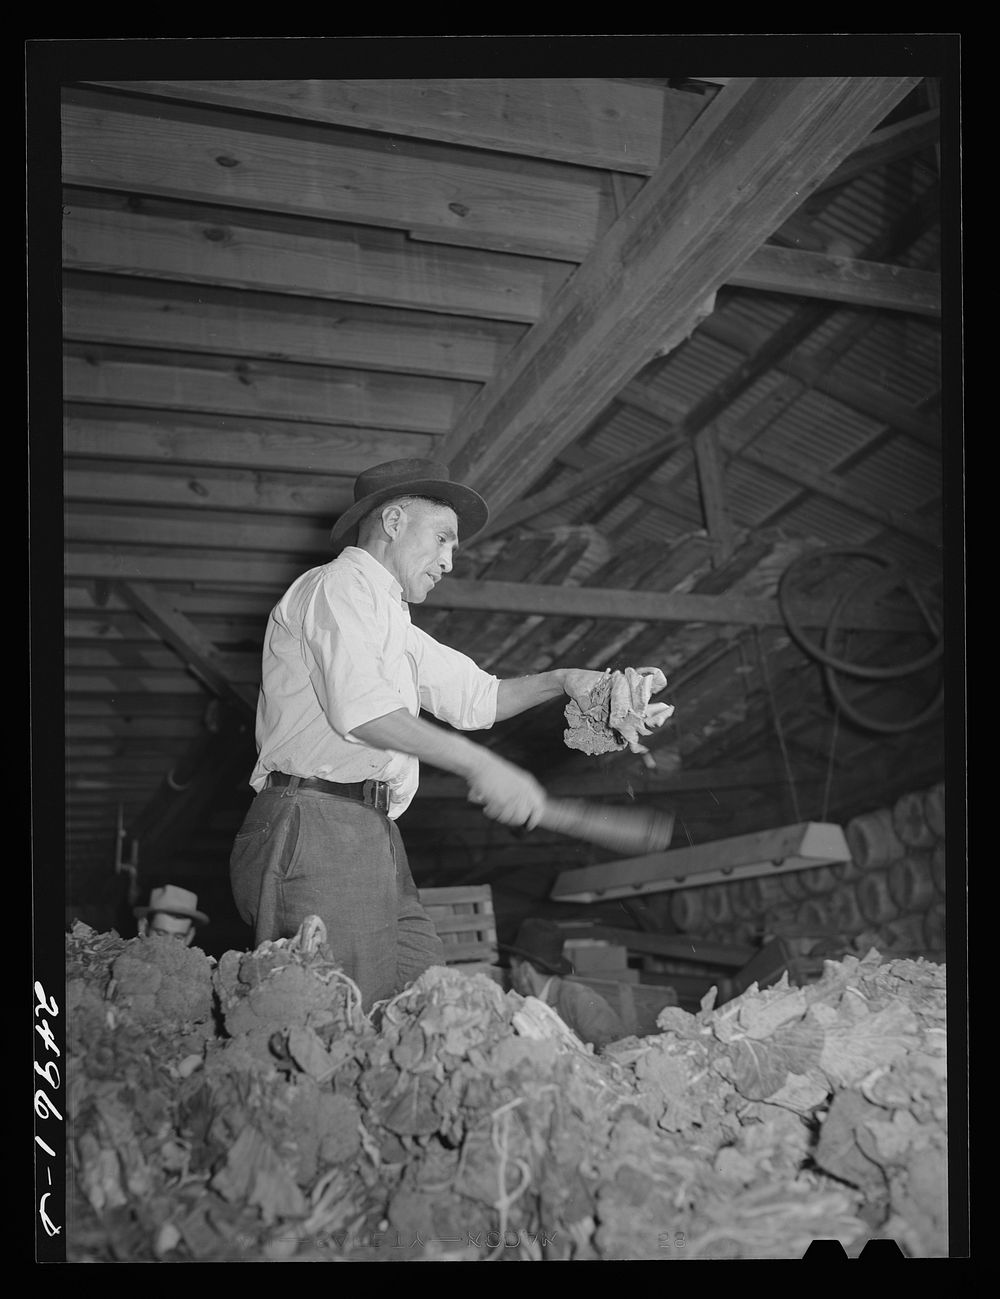 Weslaco, Texas. Preparing broccoli for packing. Packing shed. Sourced from the Library of Congress.